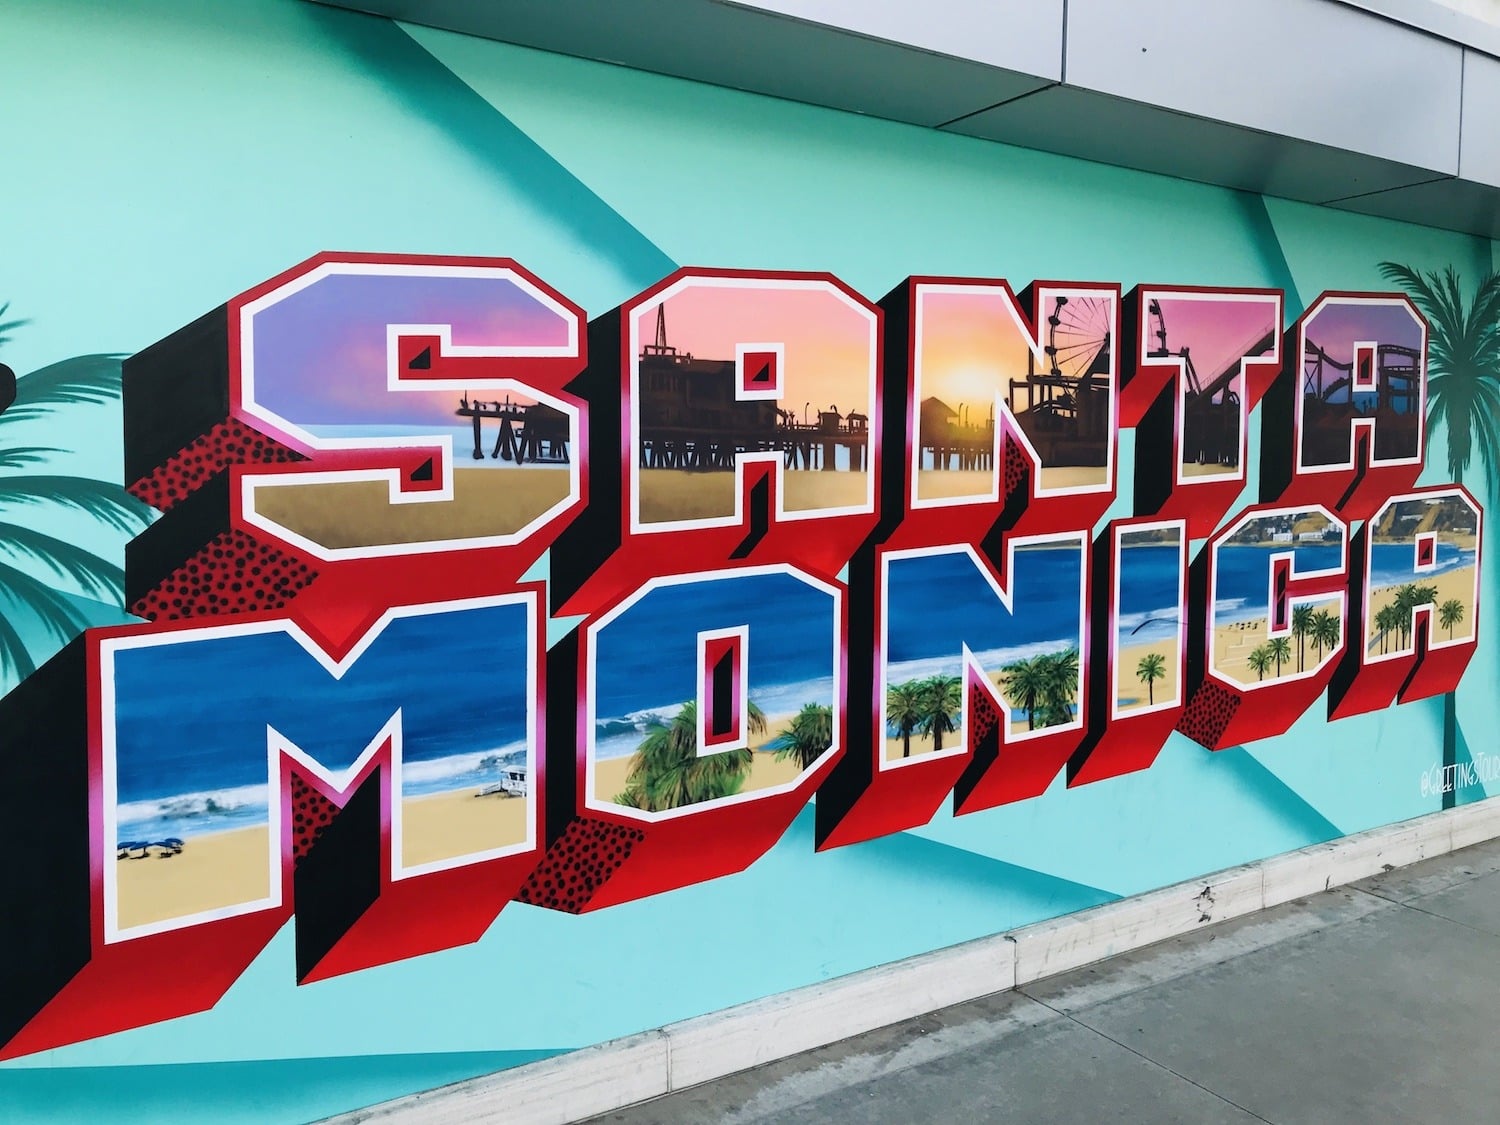 10 Fun Things To Do In Santa Monica: Seaside Bliss And Relaxed Exploring